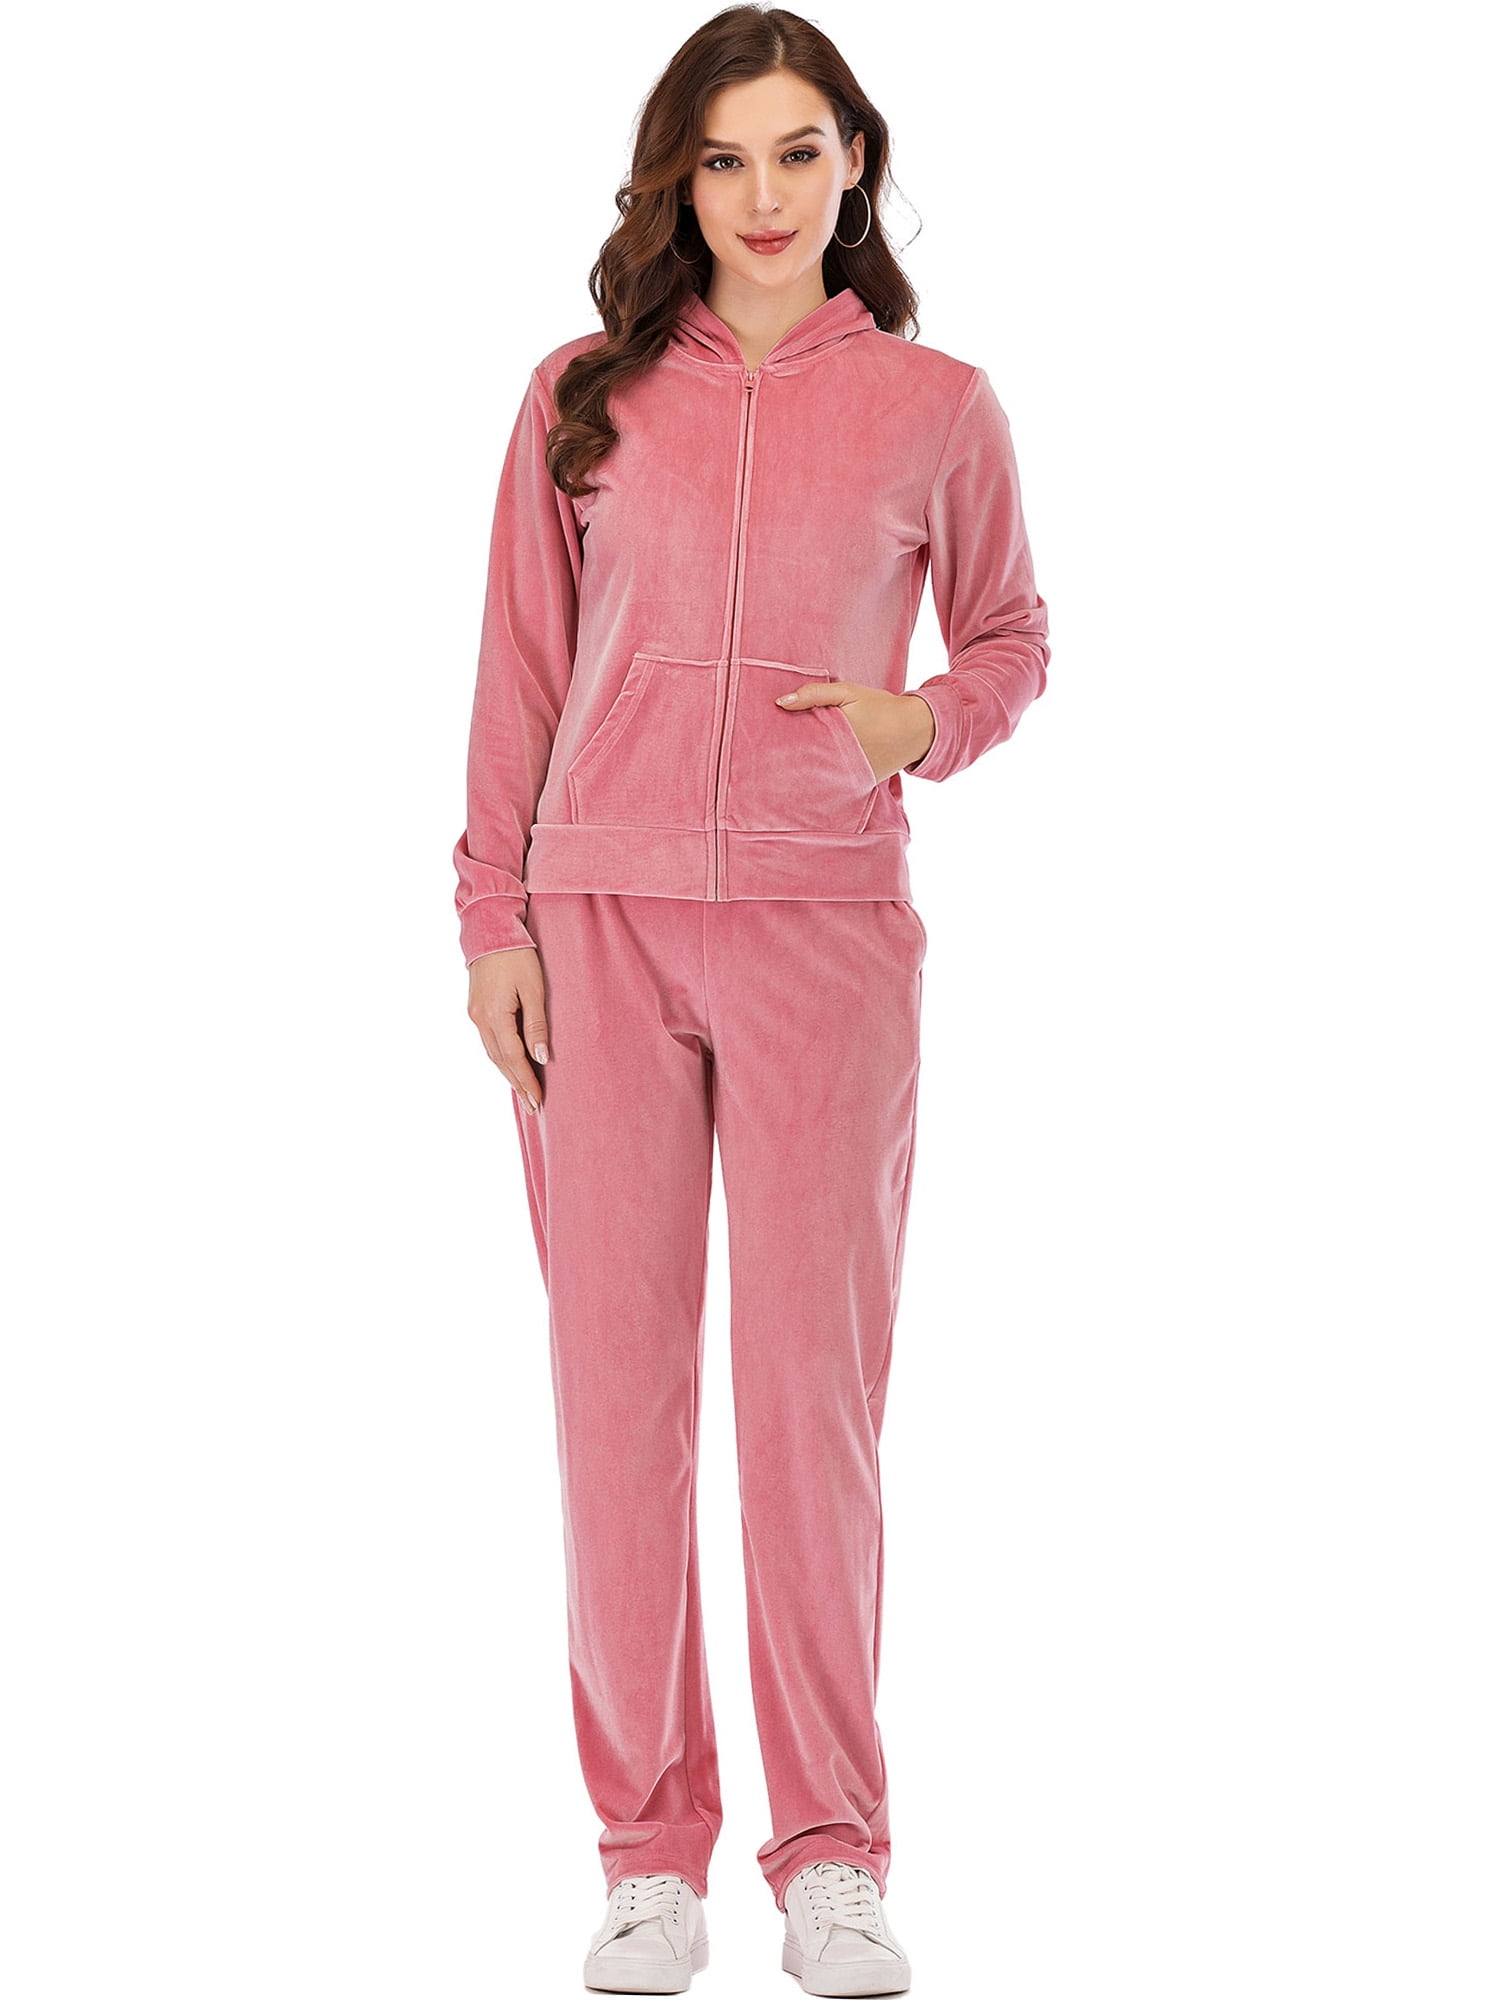 LELINTA Womens Velour Tracksuit Sets Outfit Hoodie and Pants Winter Warm  Sweatsuit Yoga Running Sport Activewear M-3XL - Walmart.com